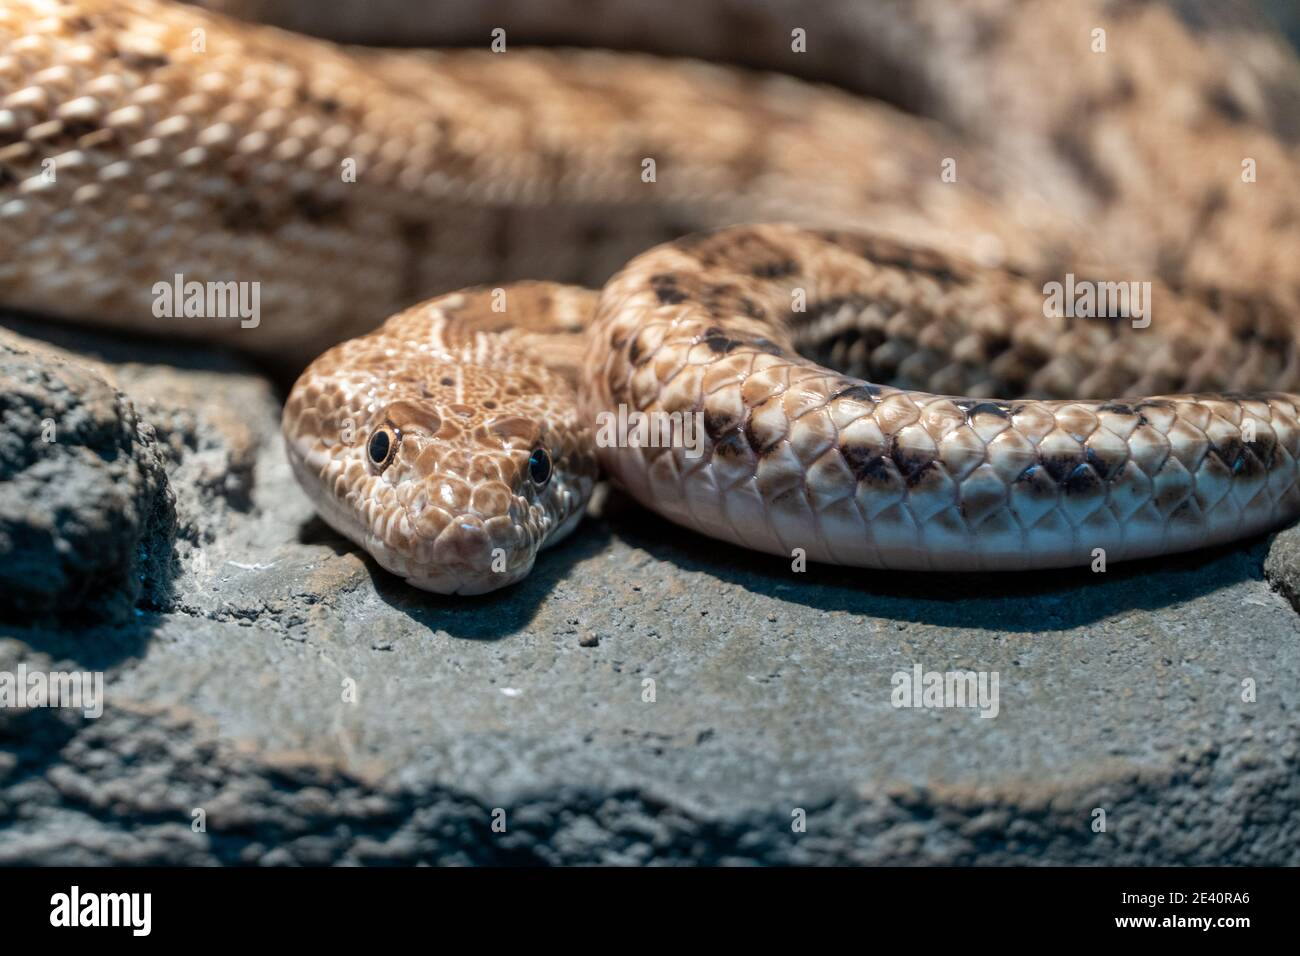 Spalerosophis diadema, known commonly as the diadem snake and the royal  snake close up on the rocks at night in the middle east or north africa  Stock Photo - Alamy